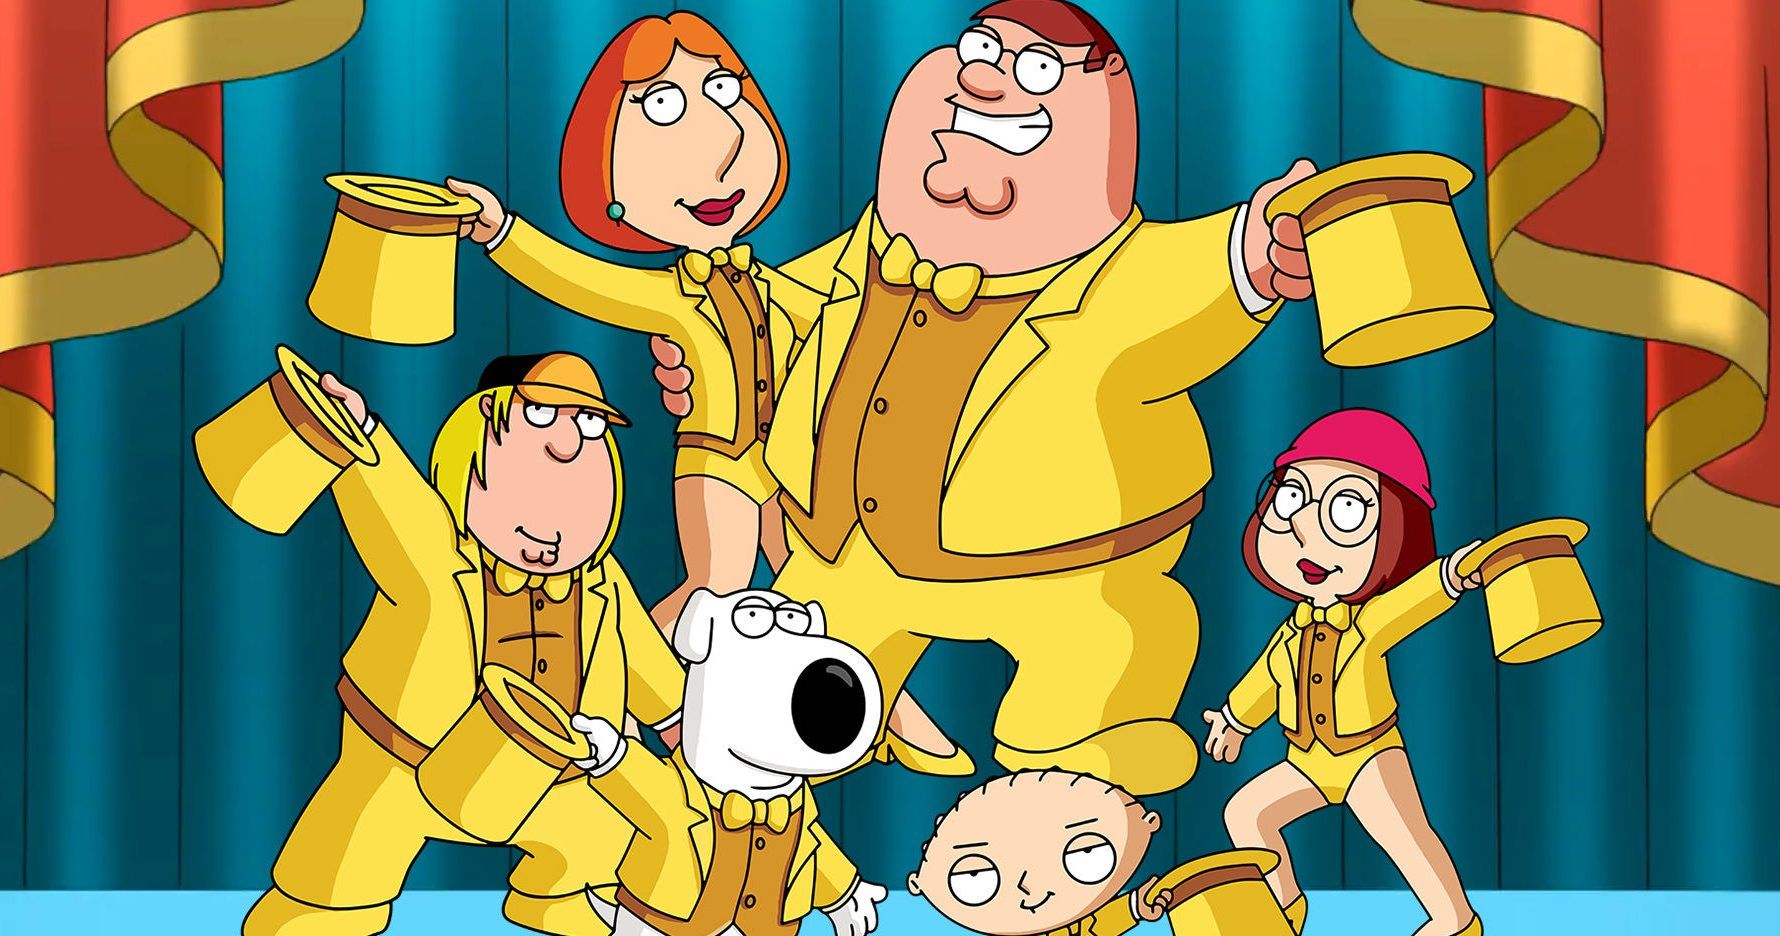 11 Shows To Watch If You Like Family Guy